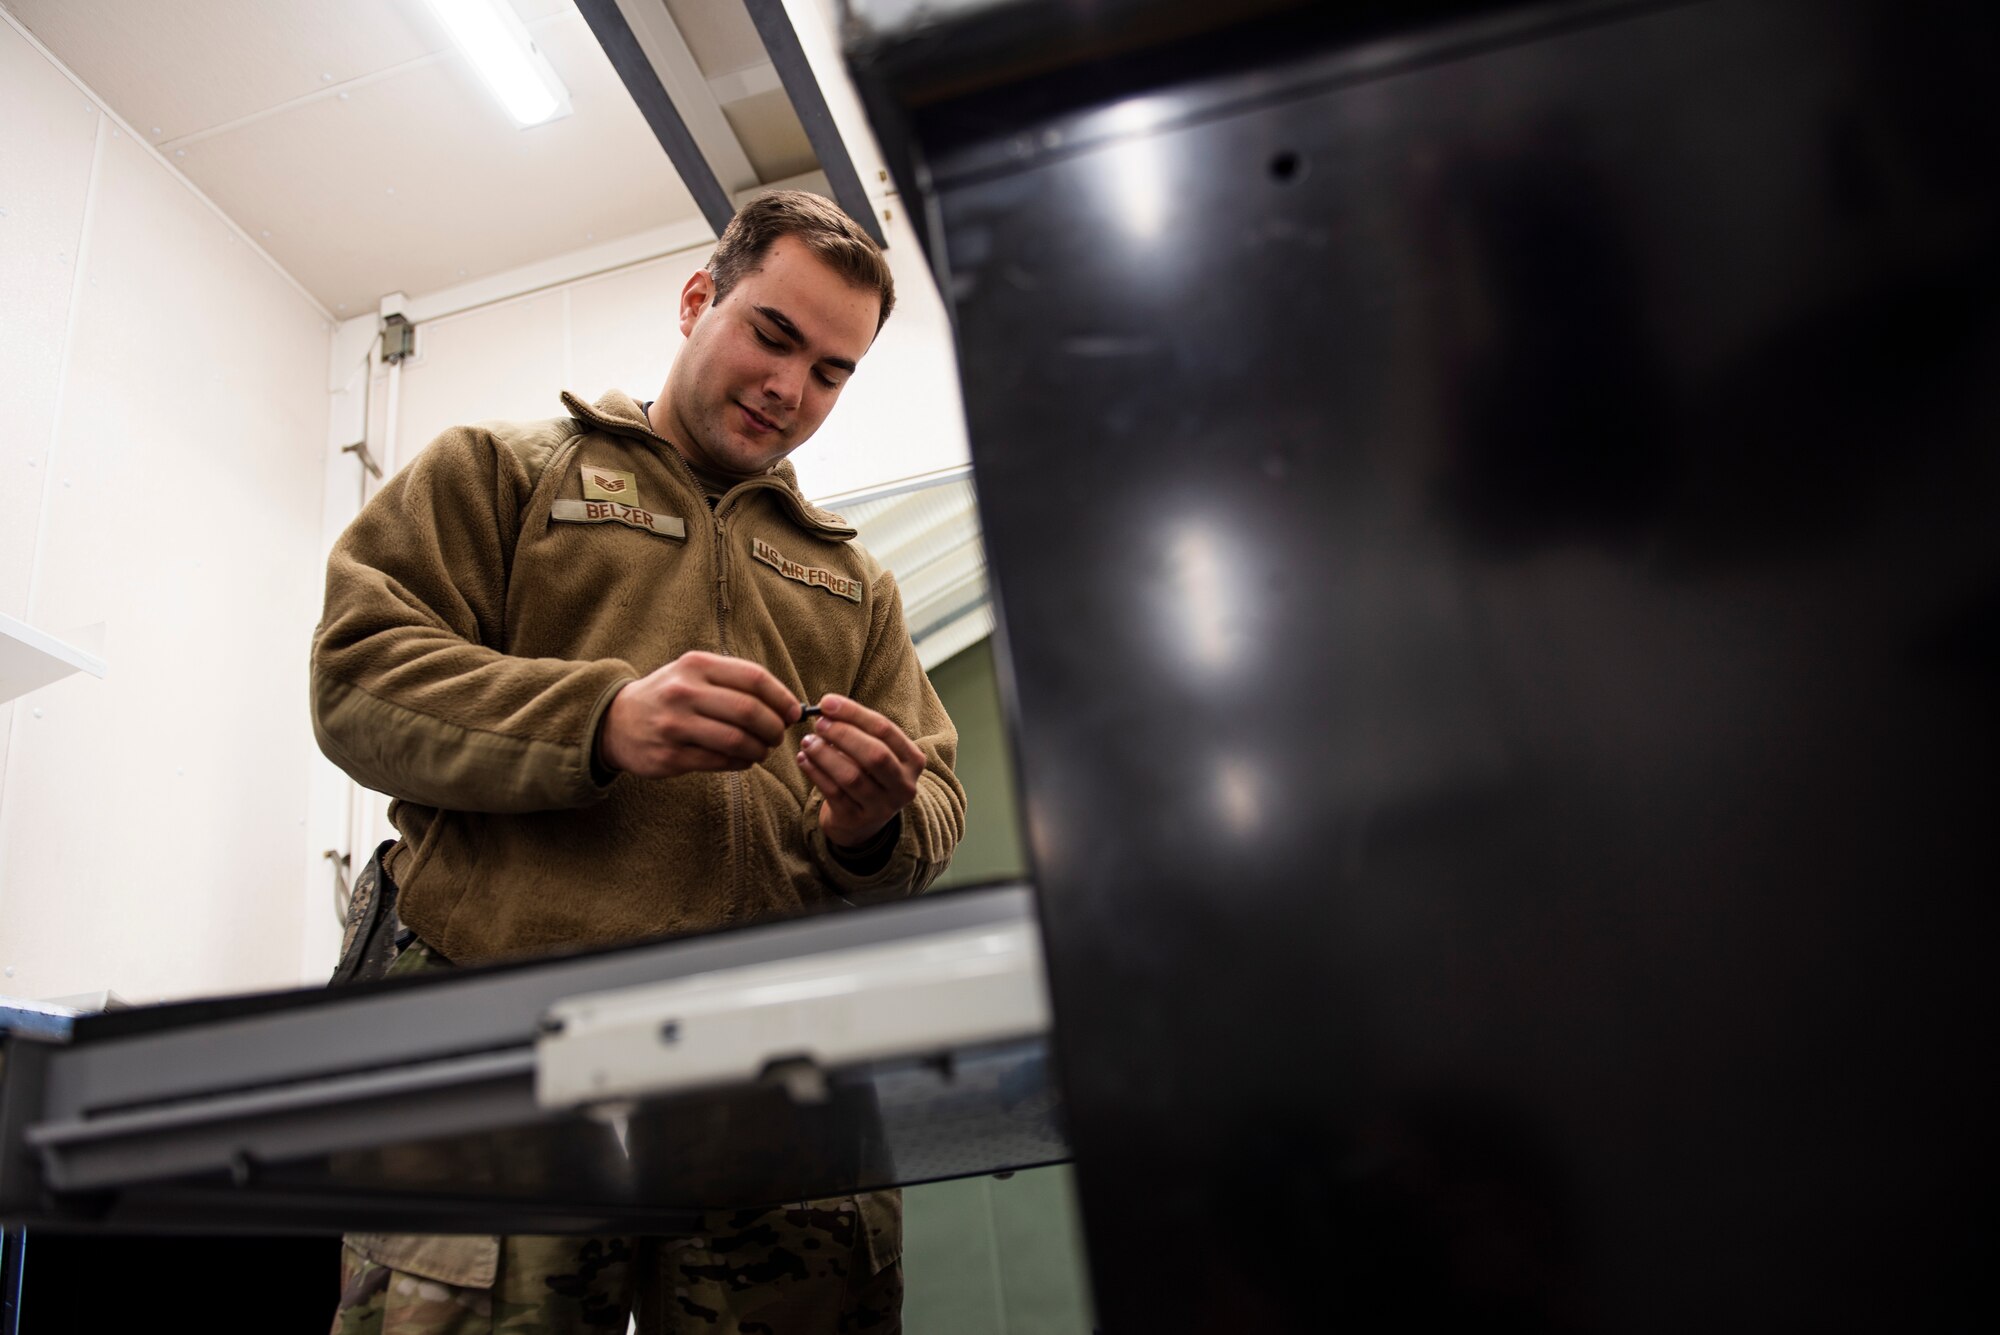 Staff Sgt. Patrick Belzer, a special weapons technician assigned to the 39th Maintenance Squadron, inspects maintenance equipment at Incirlik Air Base, Turkey, Dec. 21, 2021.